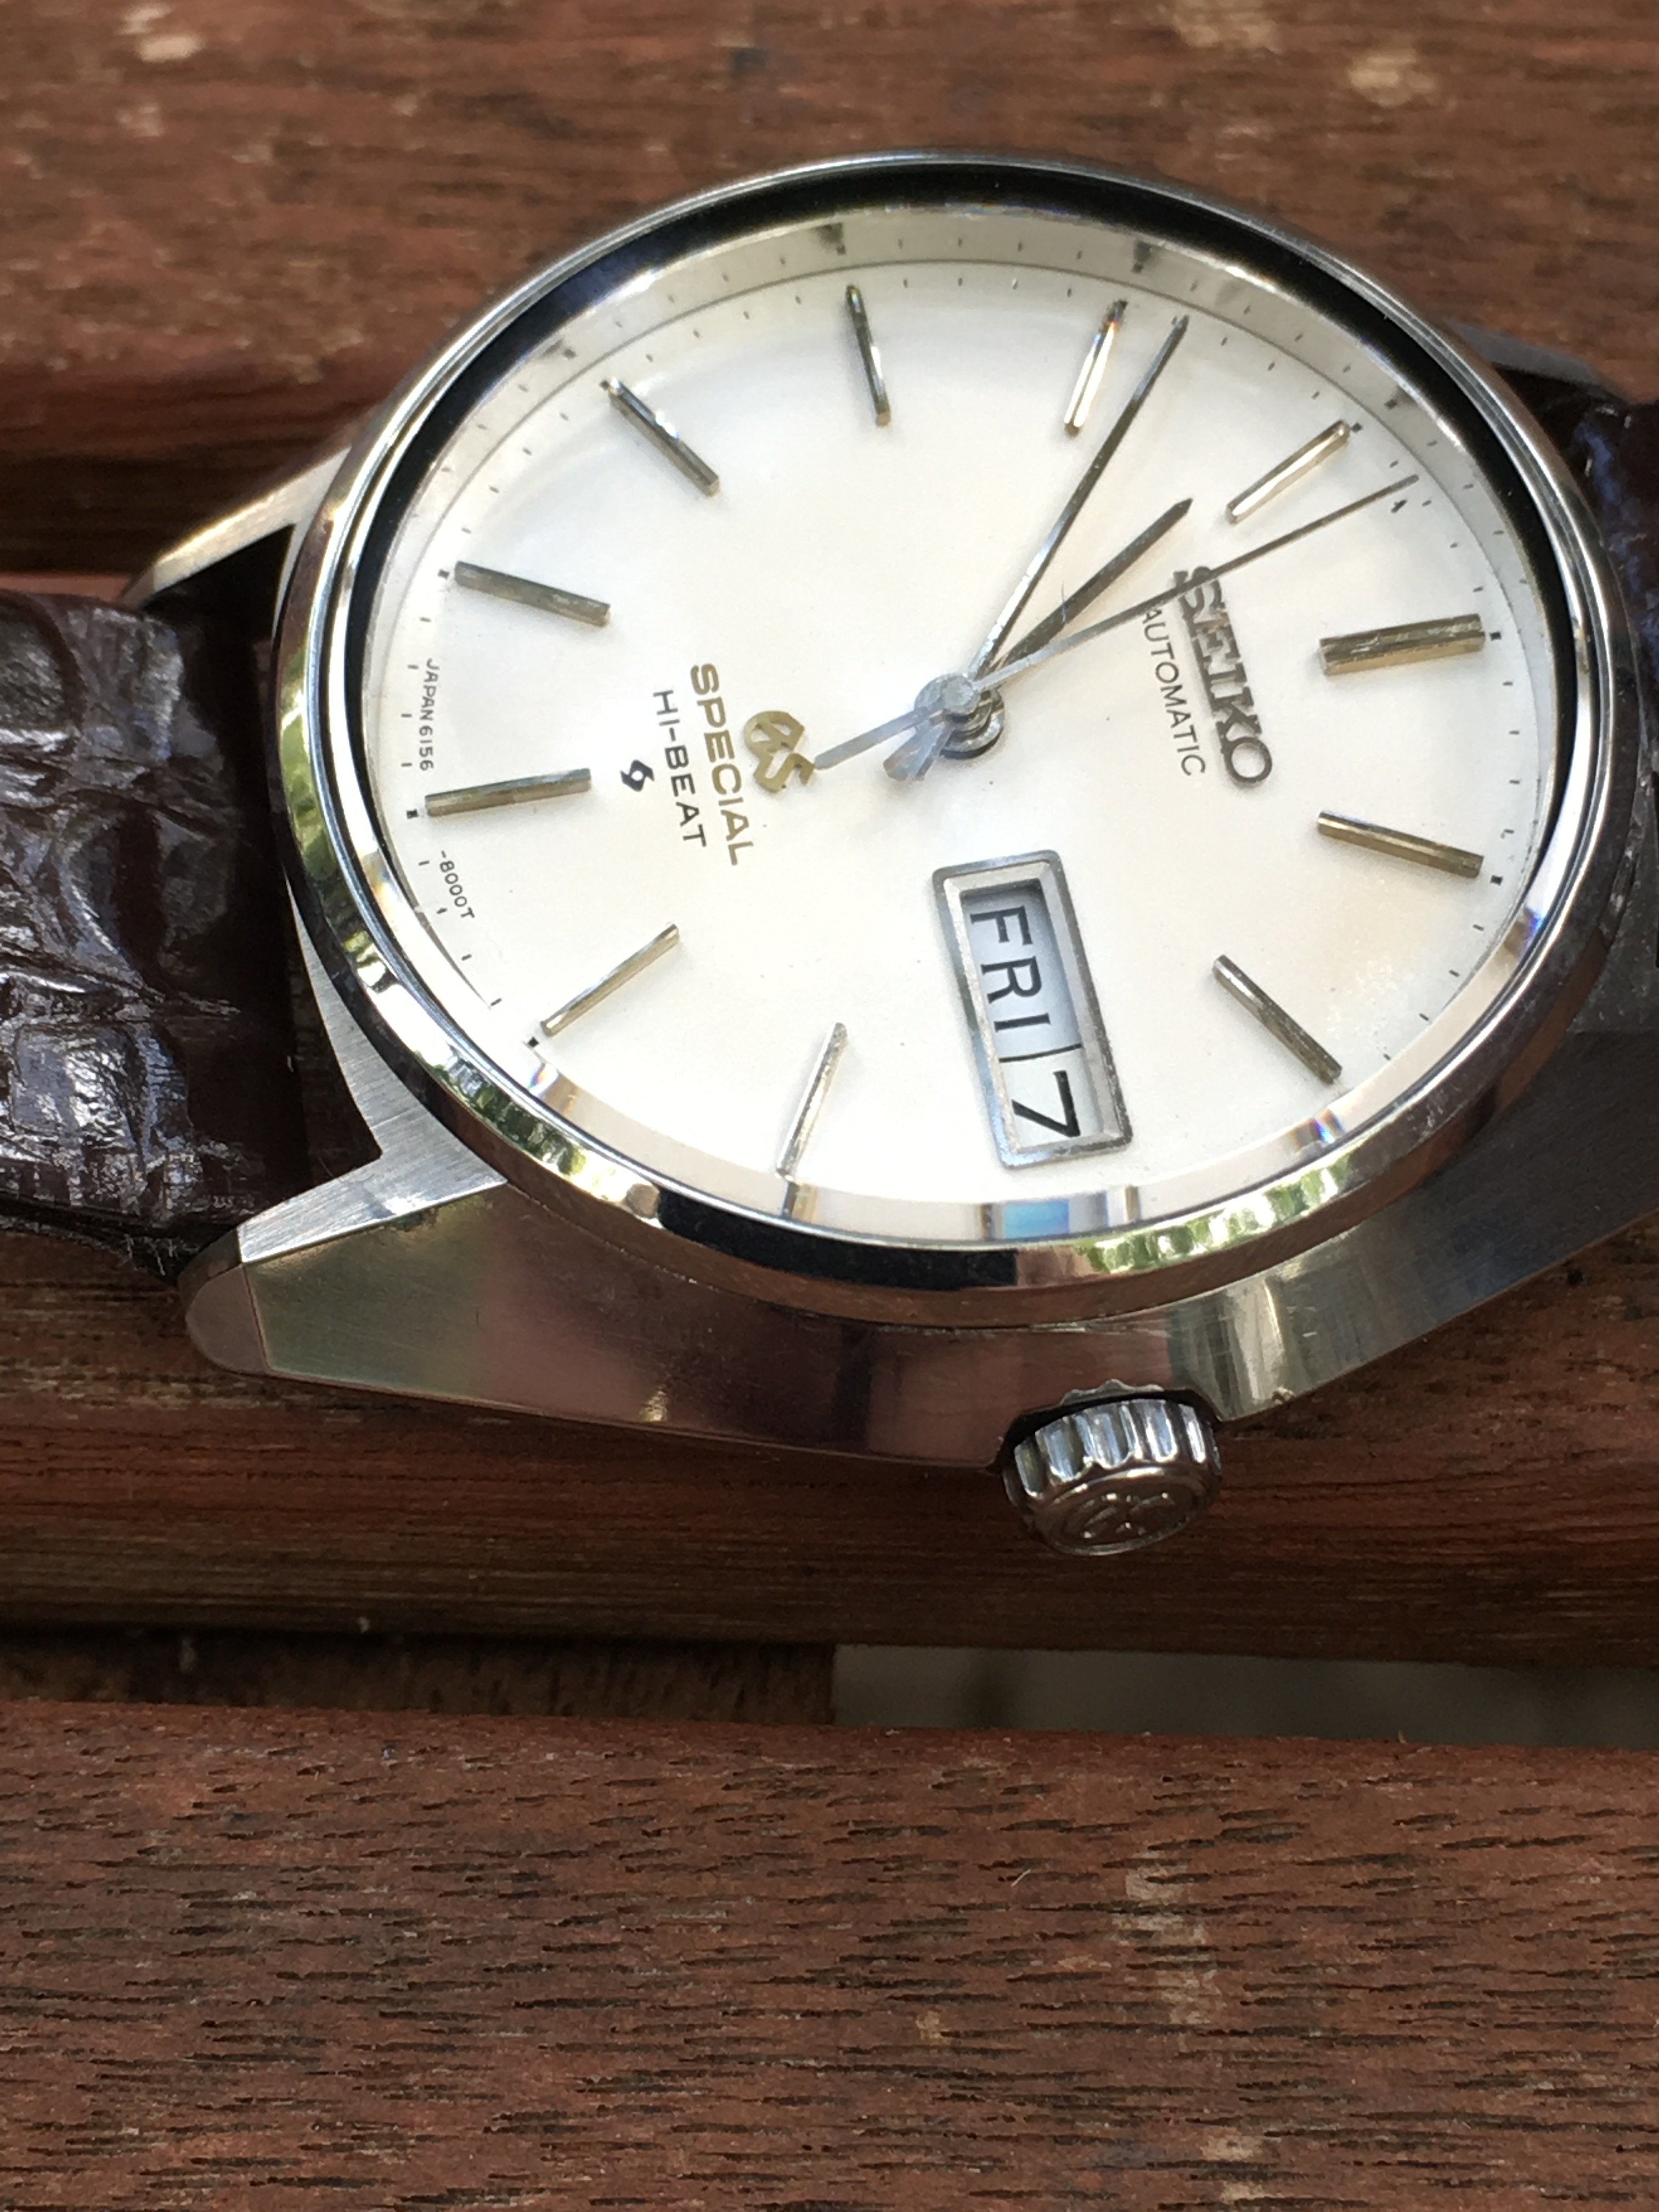 SOLD - REDUCED 1970 Grand Seiko 6156-8000 Special Hi-Beat | Omega Forums